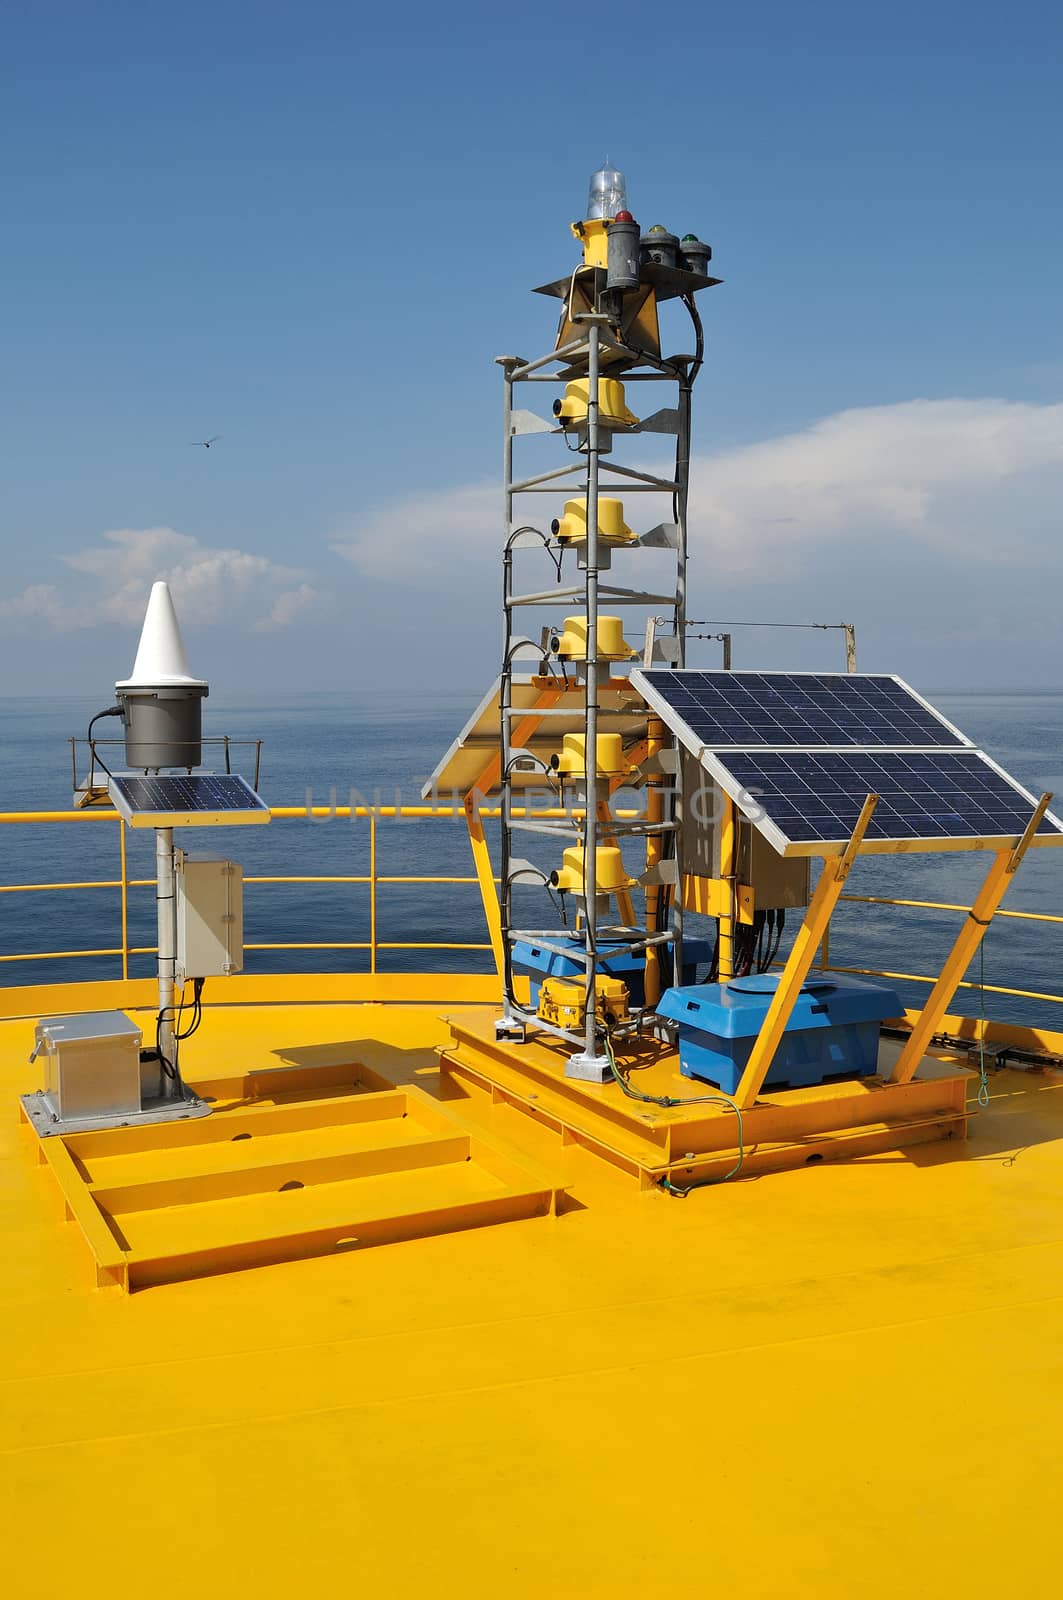 solar cells on oil loading platform by think4photop